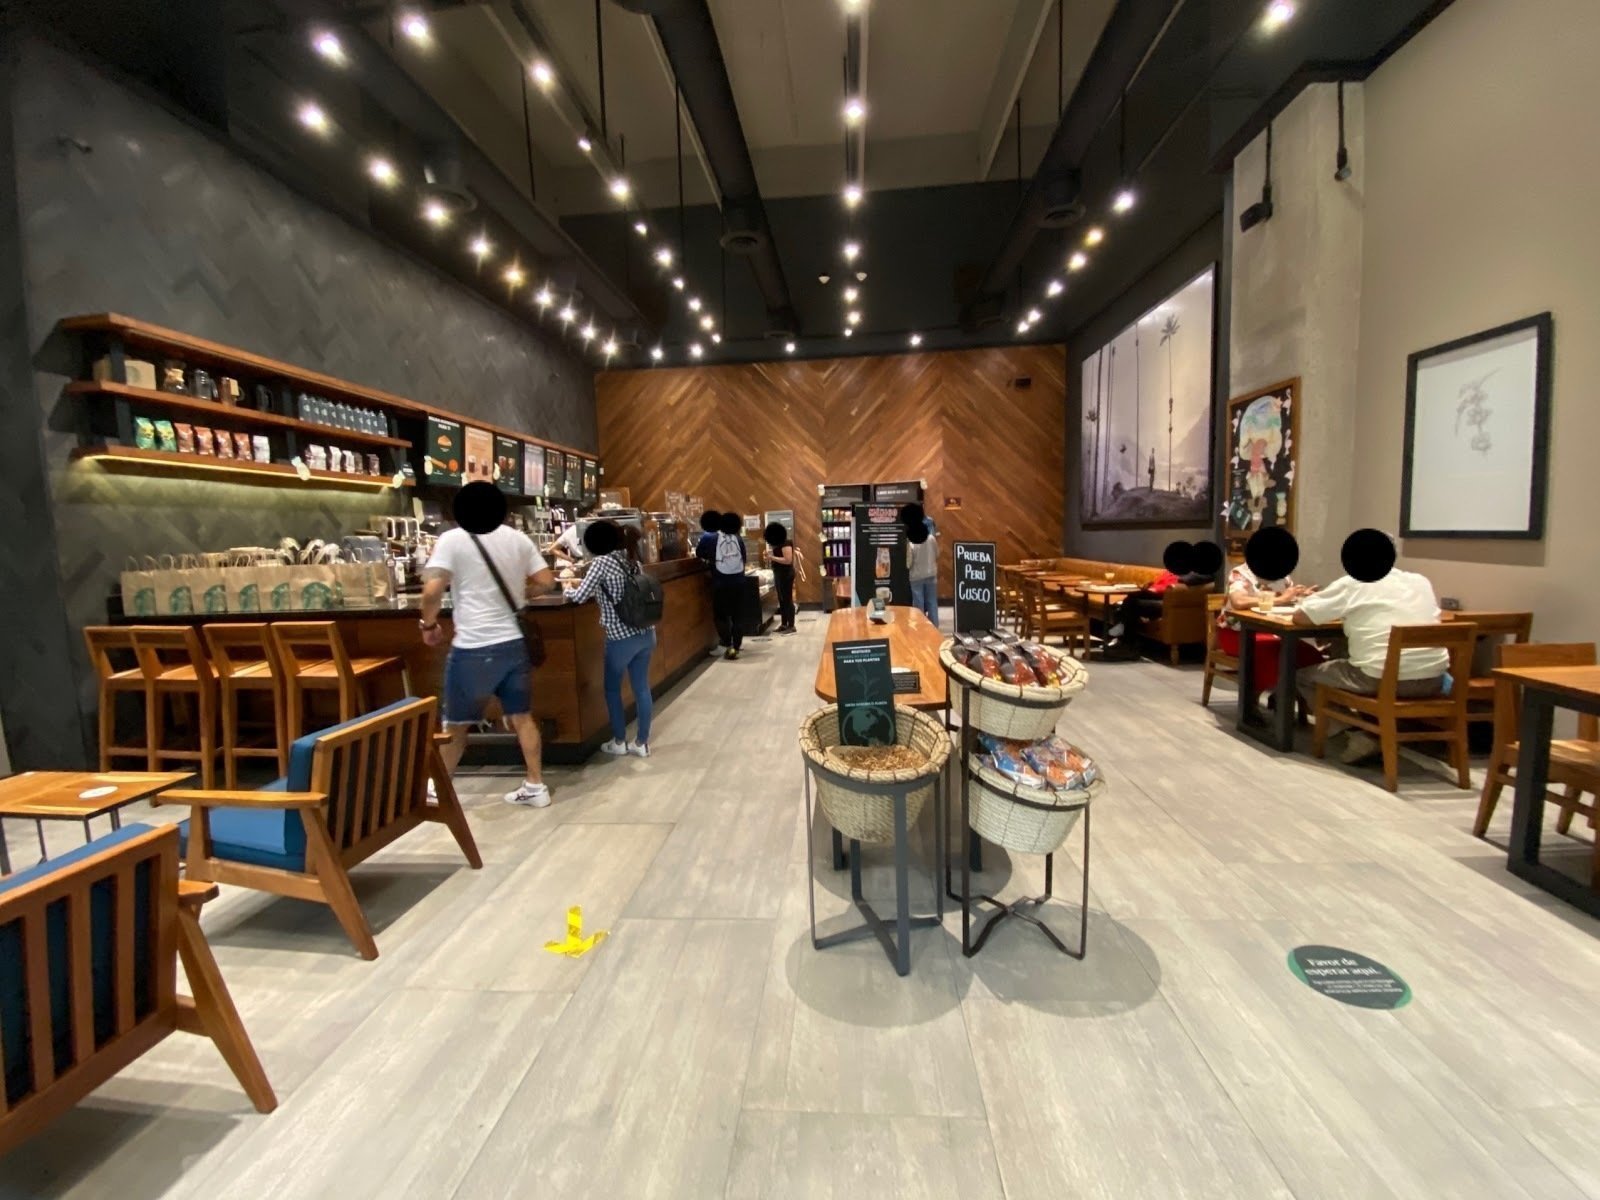 <span class="translation_missing" title="translation missing: en.meta.location_title, location_name: Starbucks Plaza Fortuna, city: Mexico City">Location Title</span>